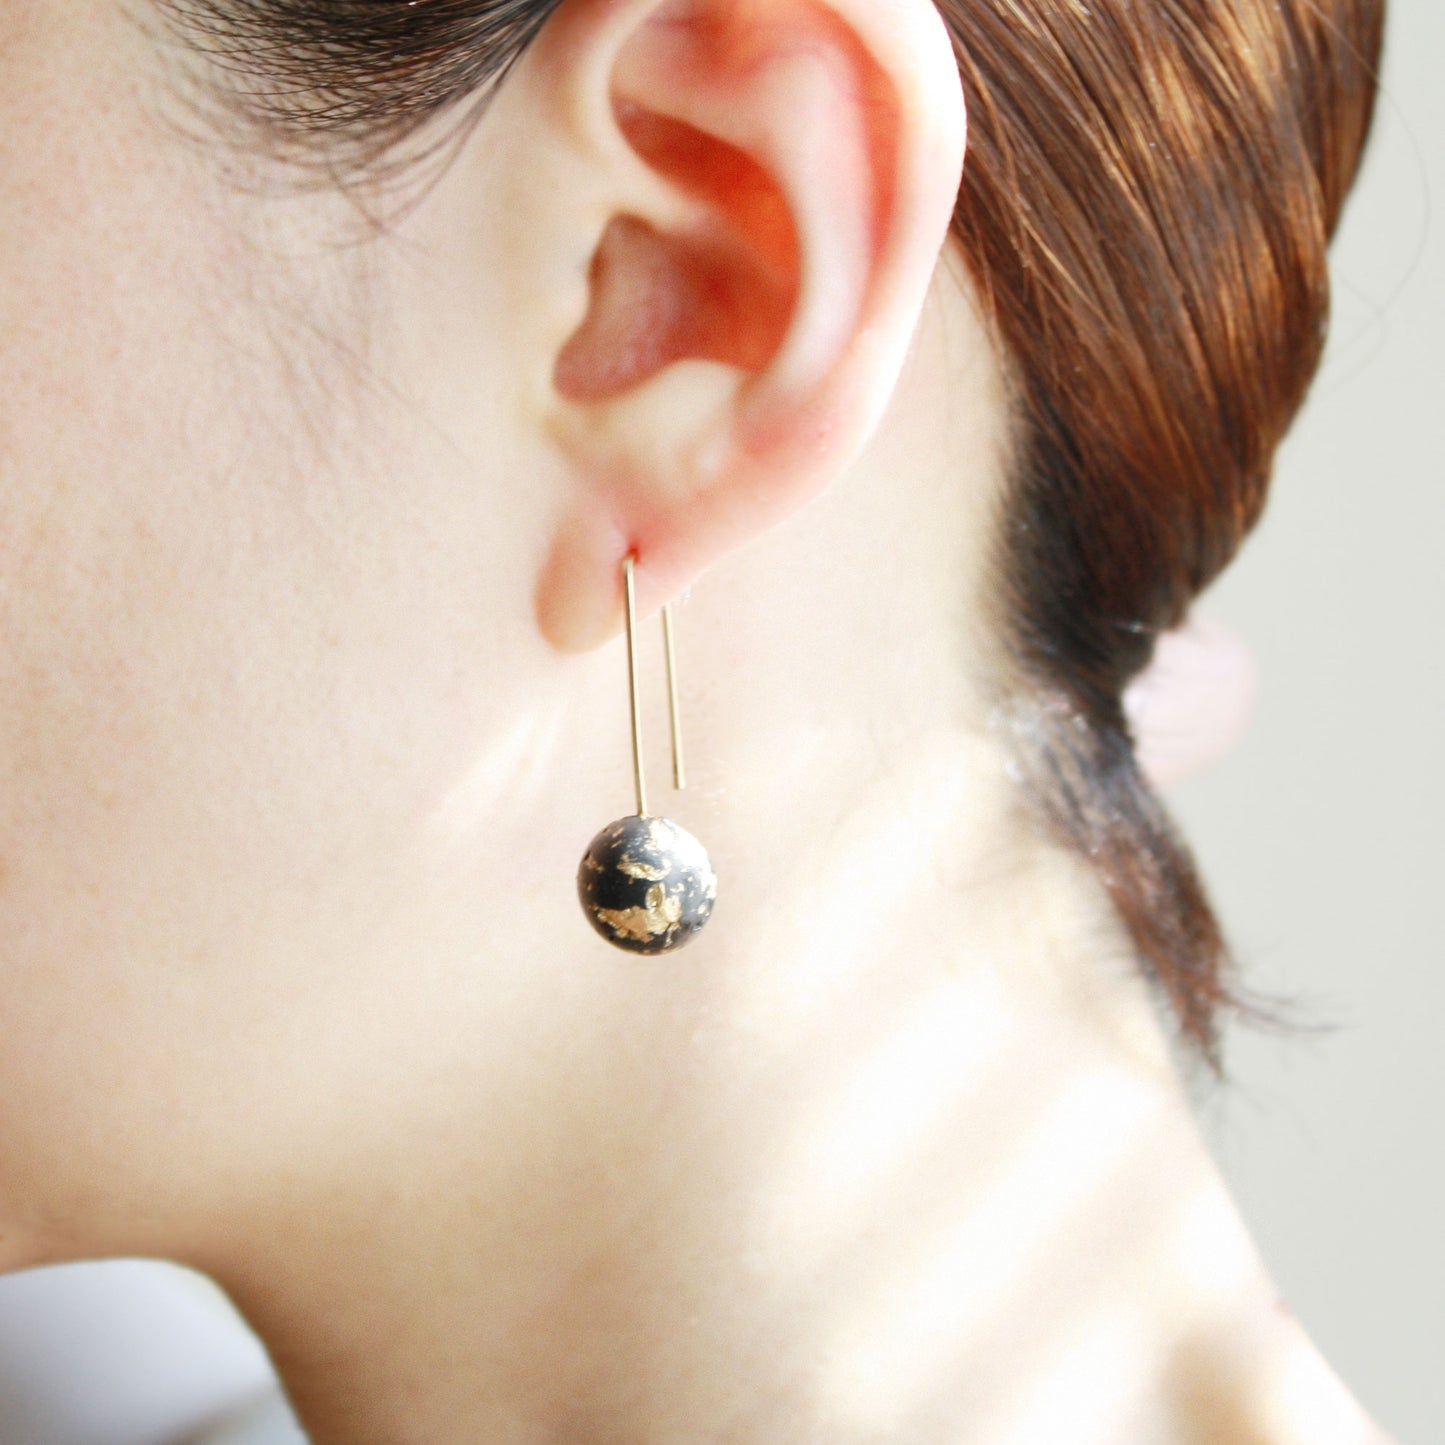 Small White Dome Earrings with Gold Flakes